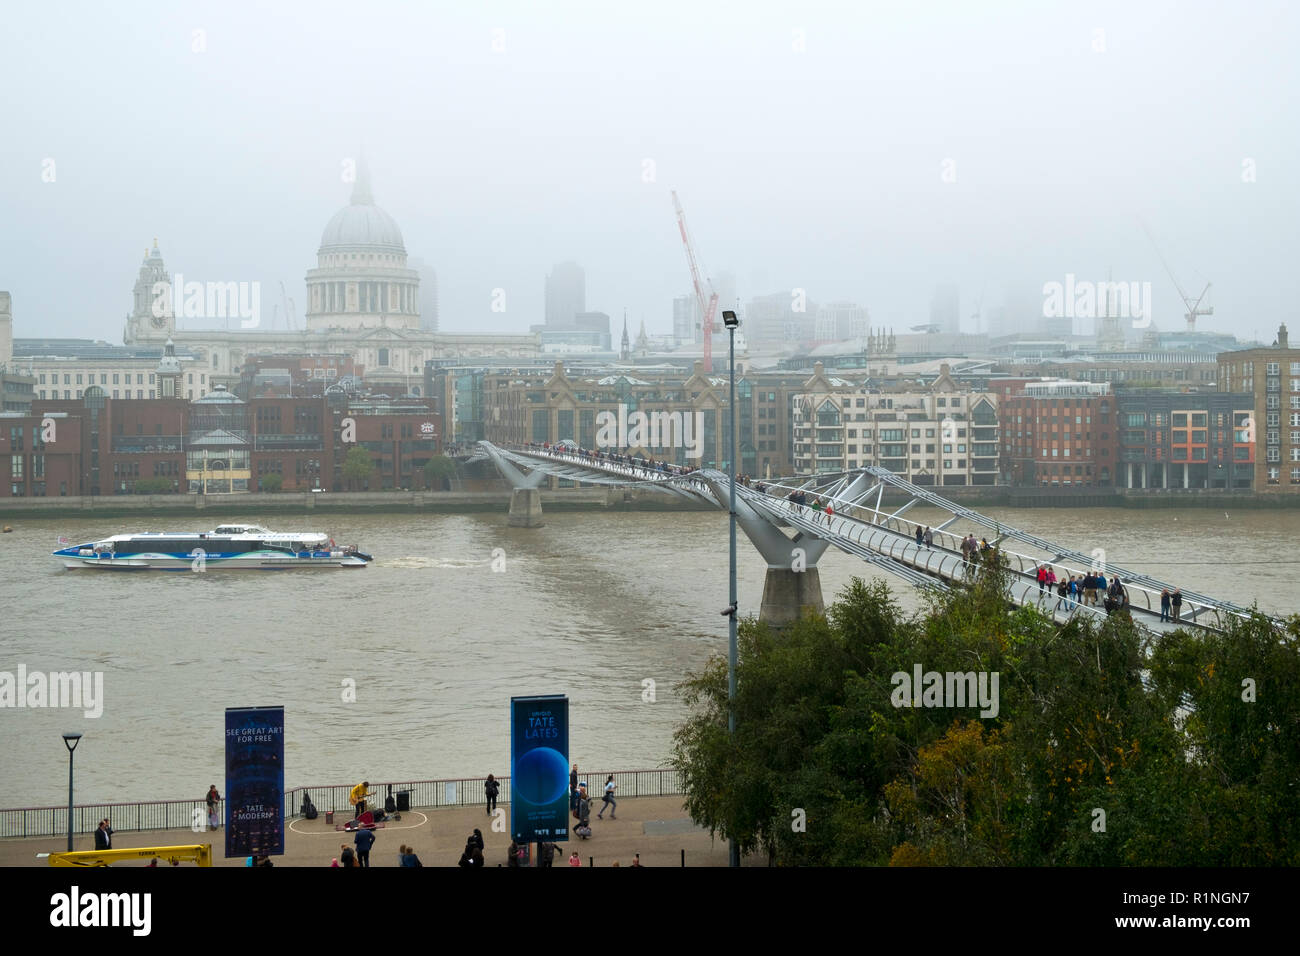 London, UK - 30th October 2016: Looking across the River Thames and the London Millennium Footbridge towards St Pauls Cathedral and The City of London on a foggy autumn day Stock Photo